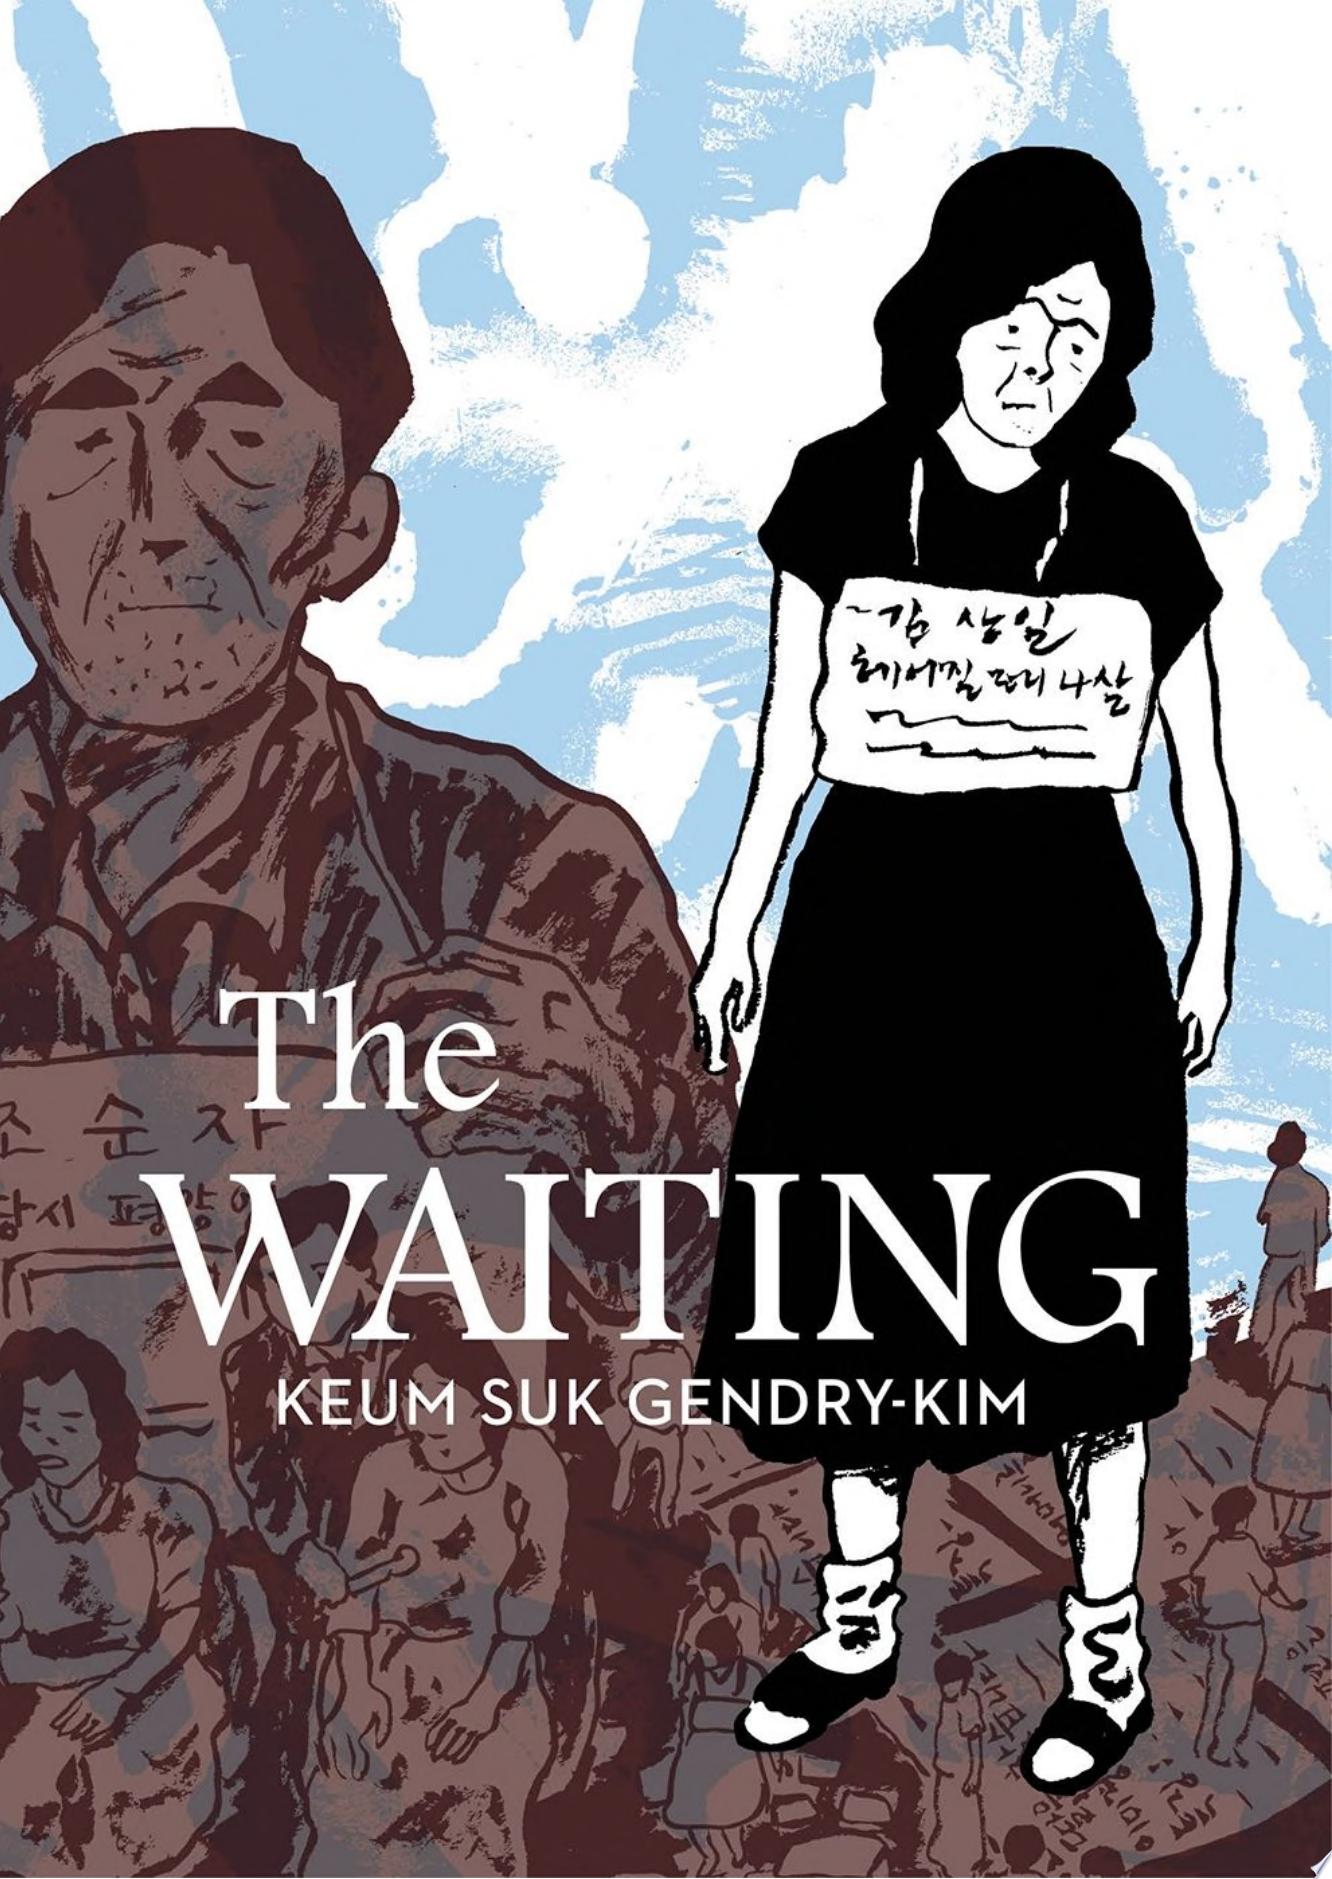 Image for "The Waiting"